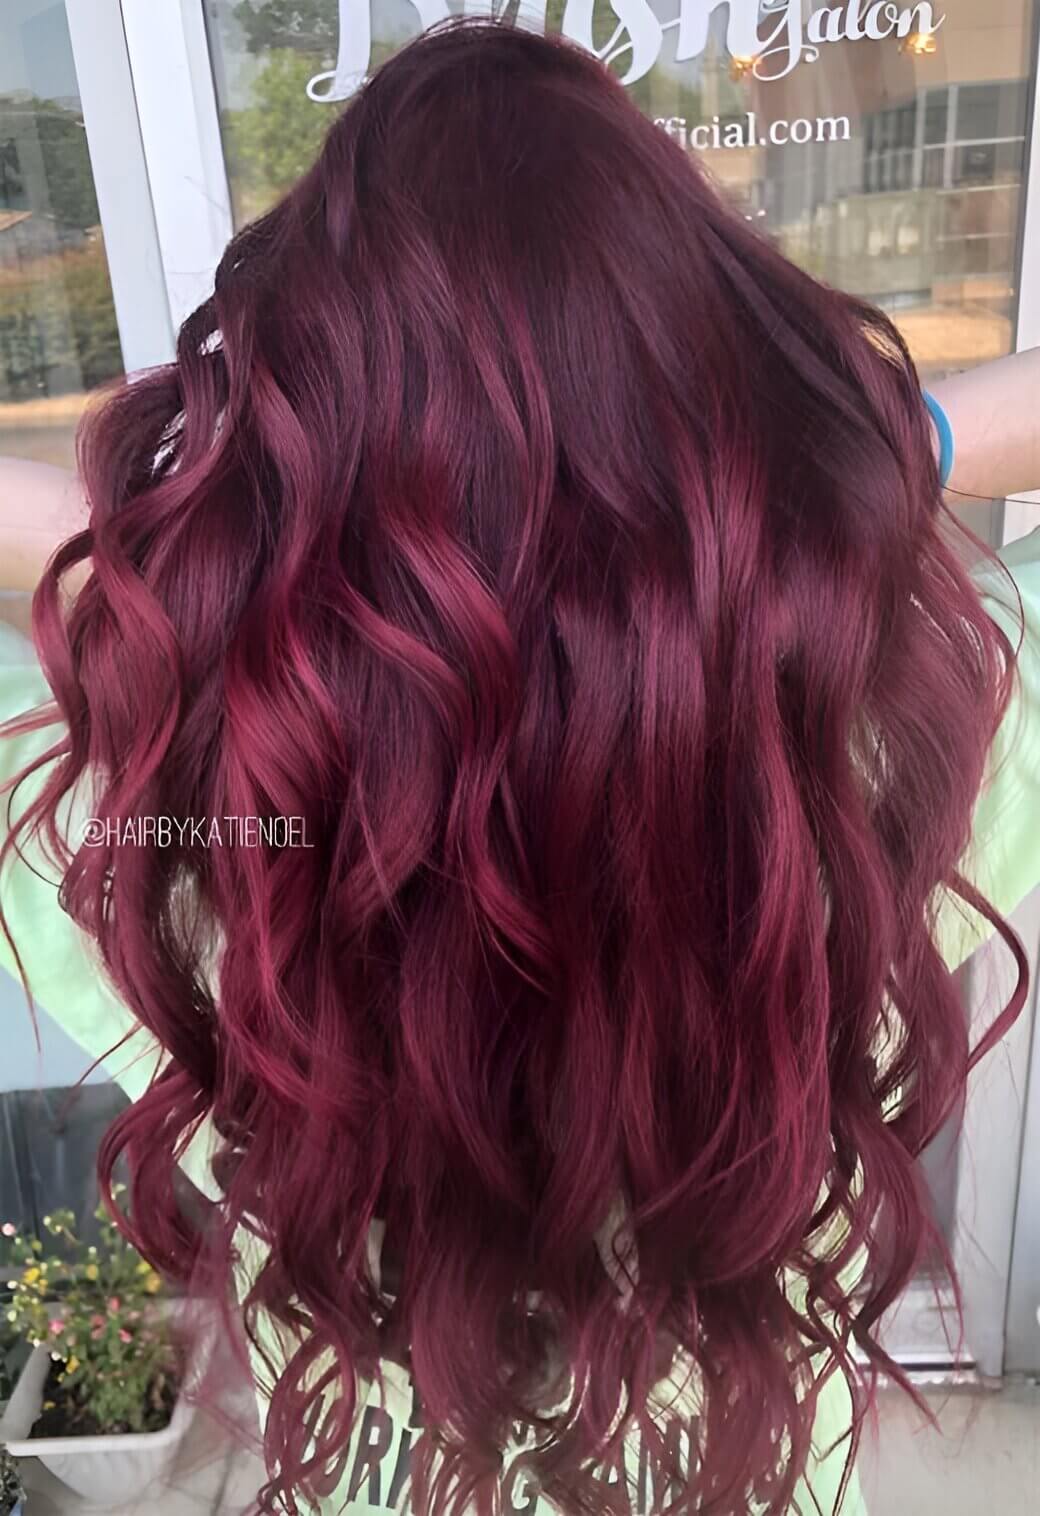 30 Breathtaking Burgundy Hair Color Ideas To Make You The Center Of ...